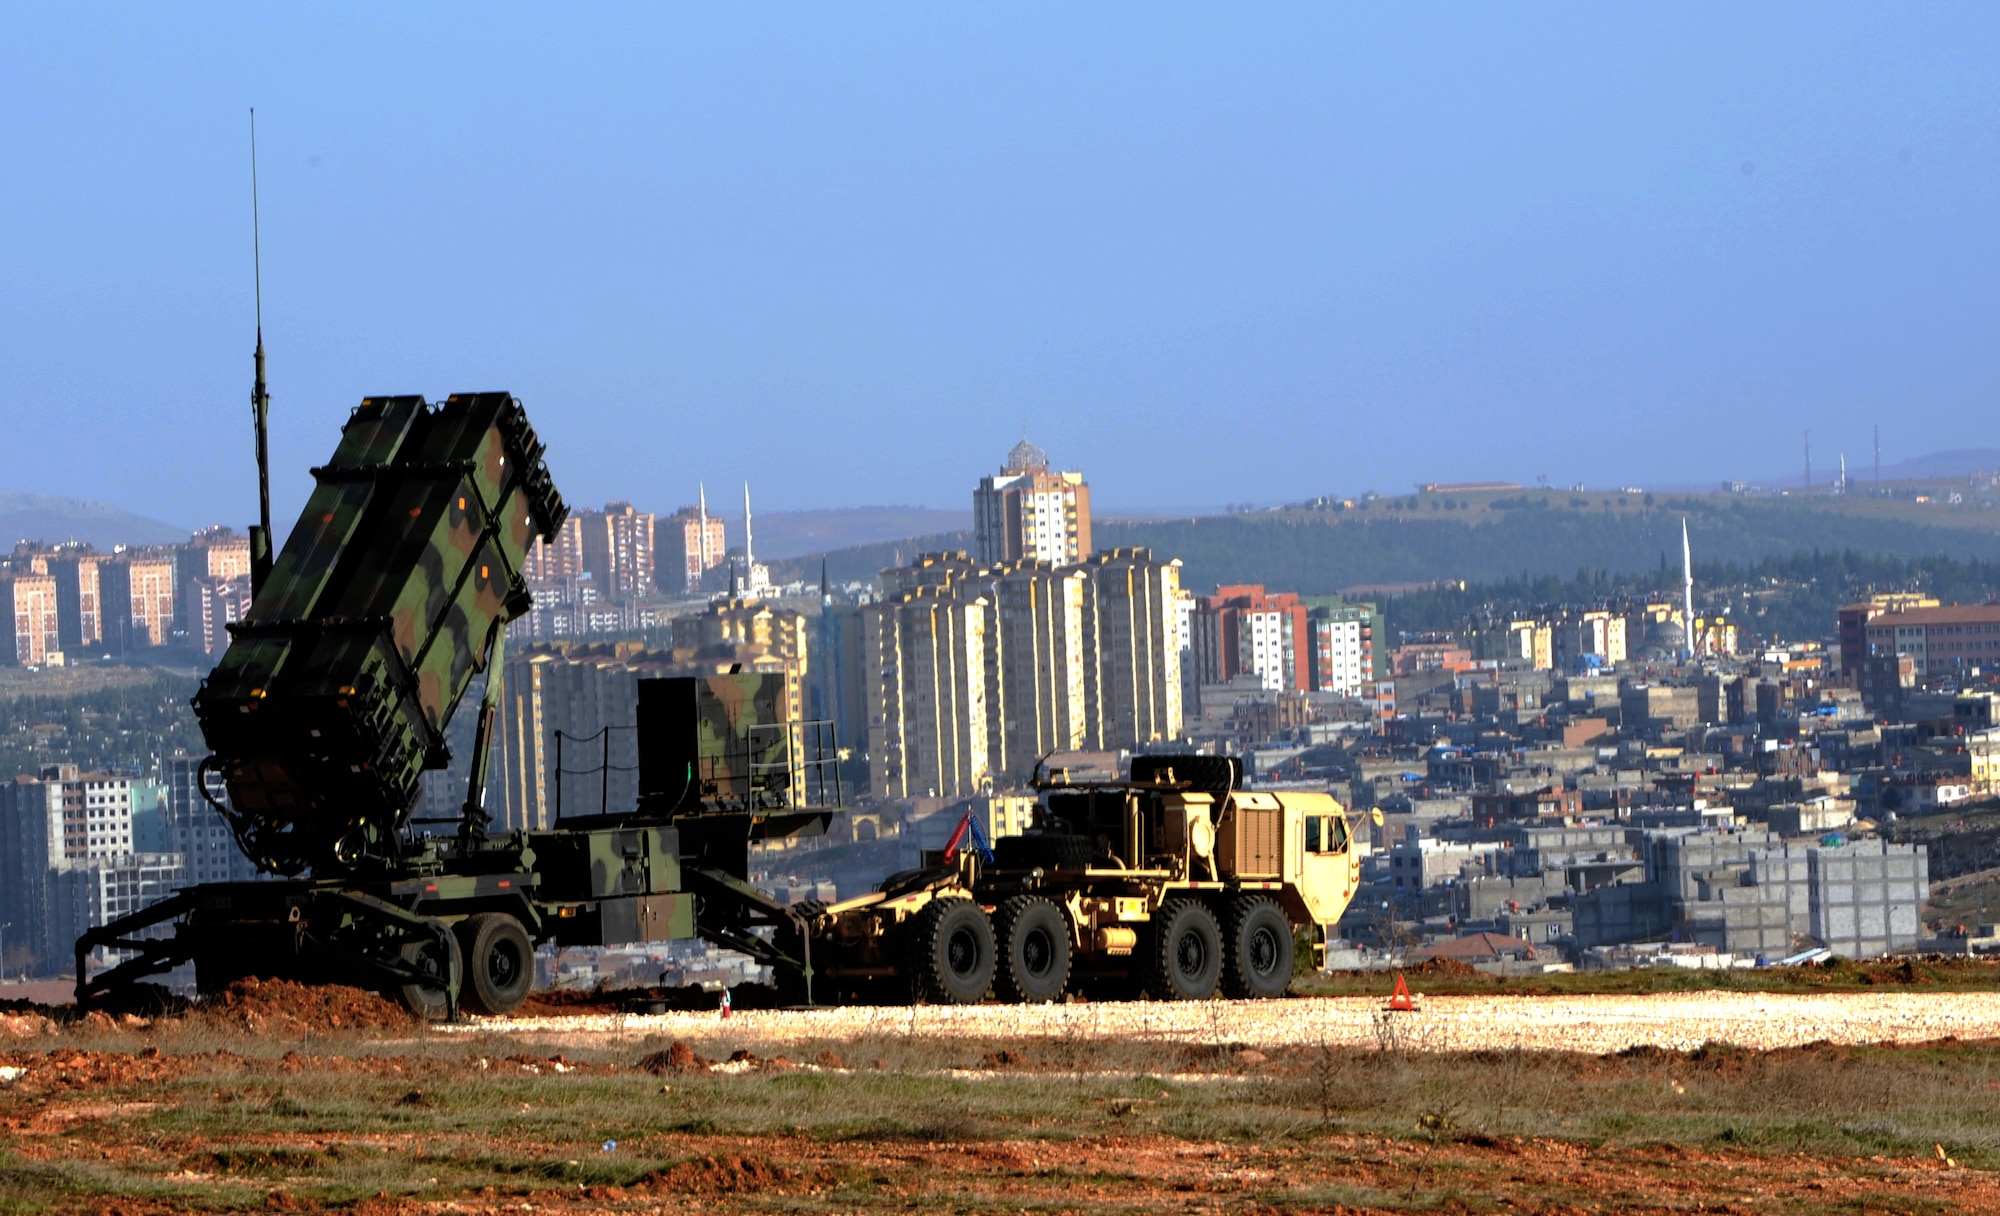 Patriot missiles stand guard over Gaziantep, Turkey, Feb. 28, 2013. Soldiers from the 3rd Battalion, 2nd Air Defense Artillery unit from Fort Sill, Okla., are deployed to Turkey to support the NATO mission of promoting regional stability and to augment Turkey's air defenses. (U.S. Air Force photo by Senior Airman Daniel Phelps/Released)